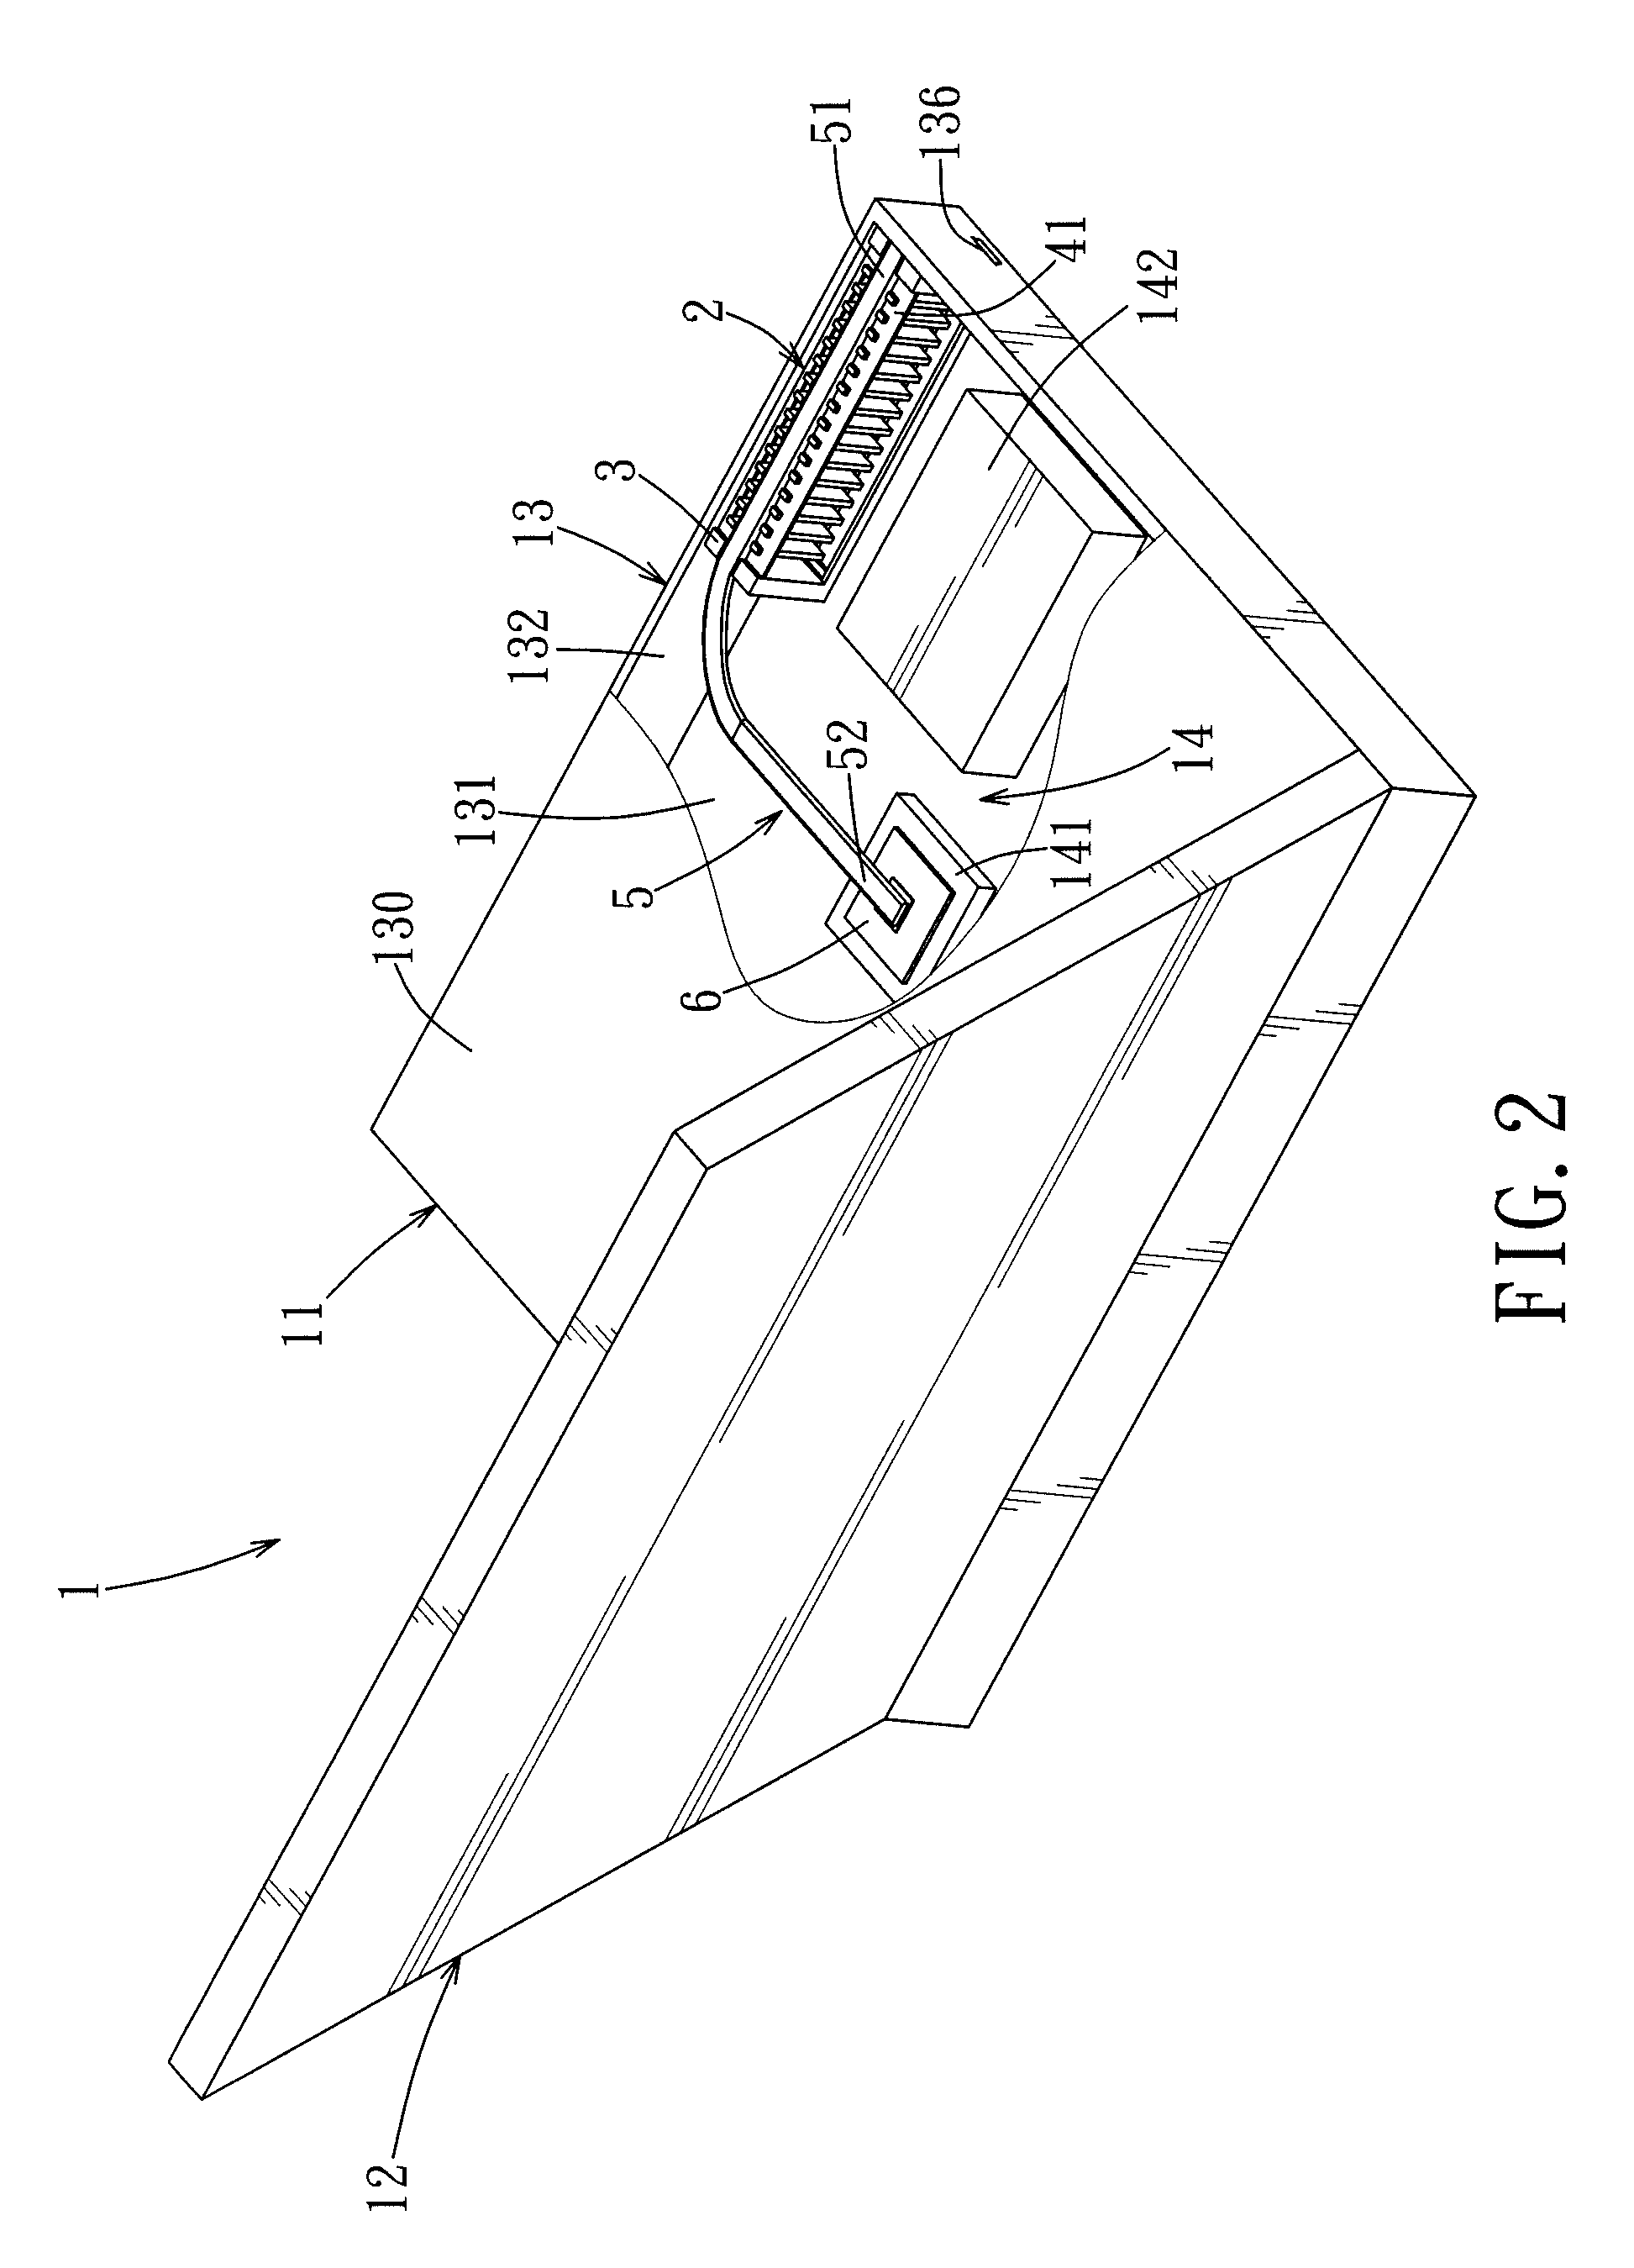 Heat-dissipating module having a dust removing mechanism, and assembly of an electronic device and the heat-dissipating module